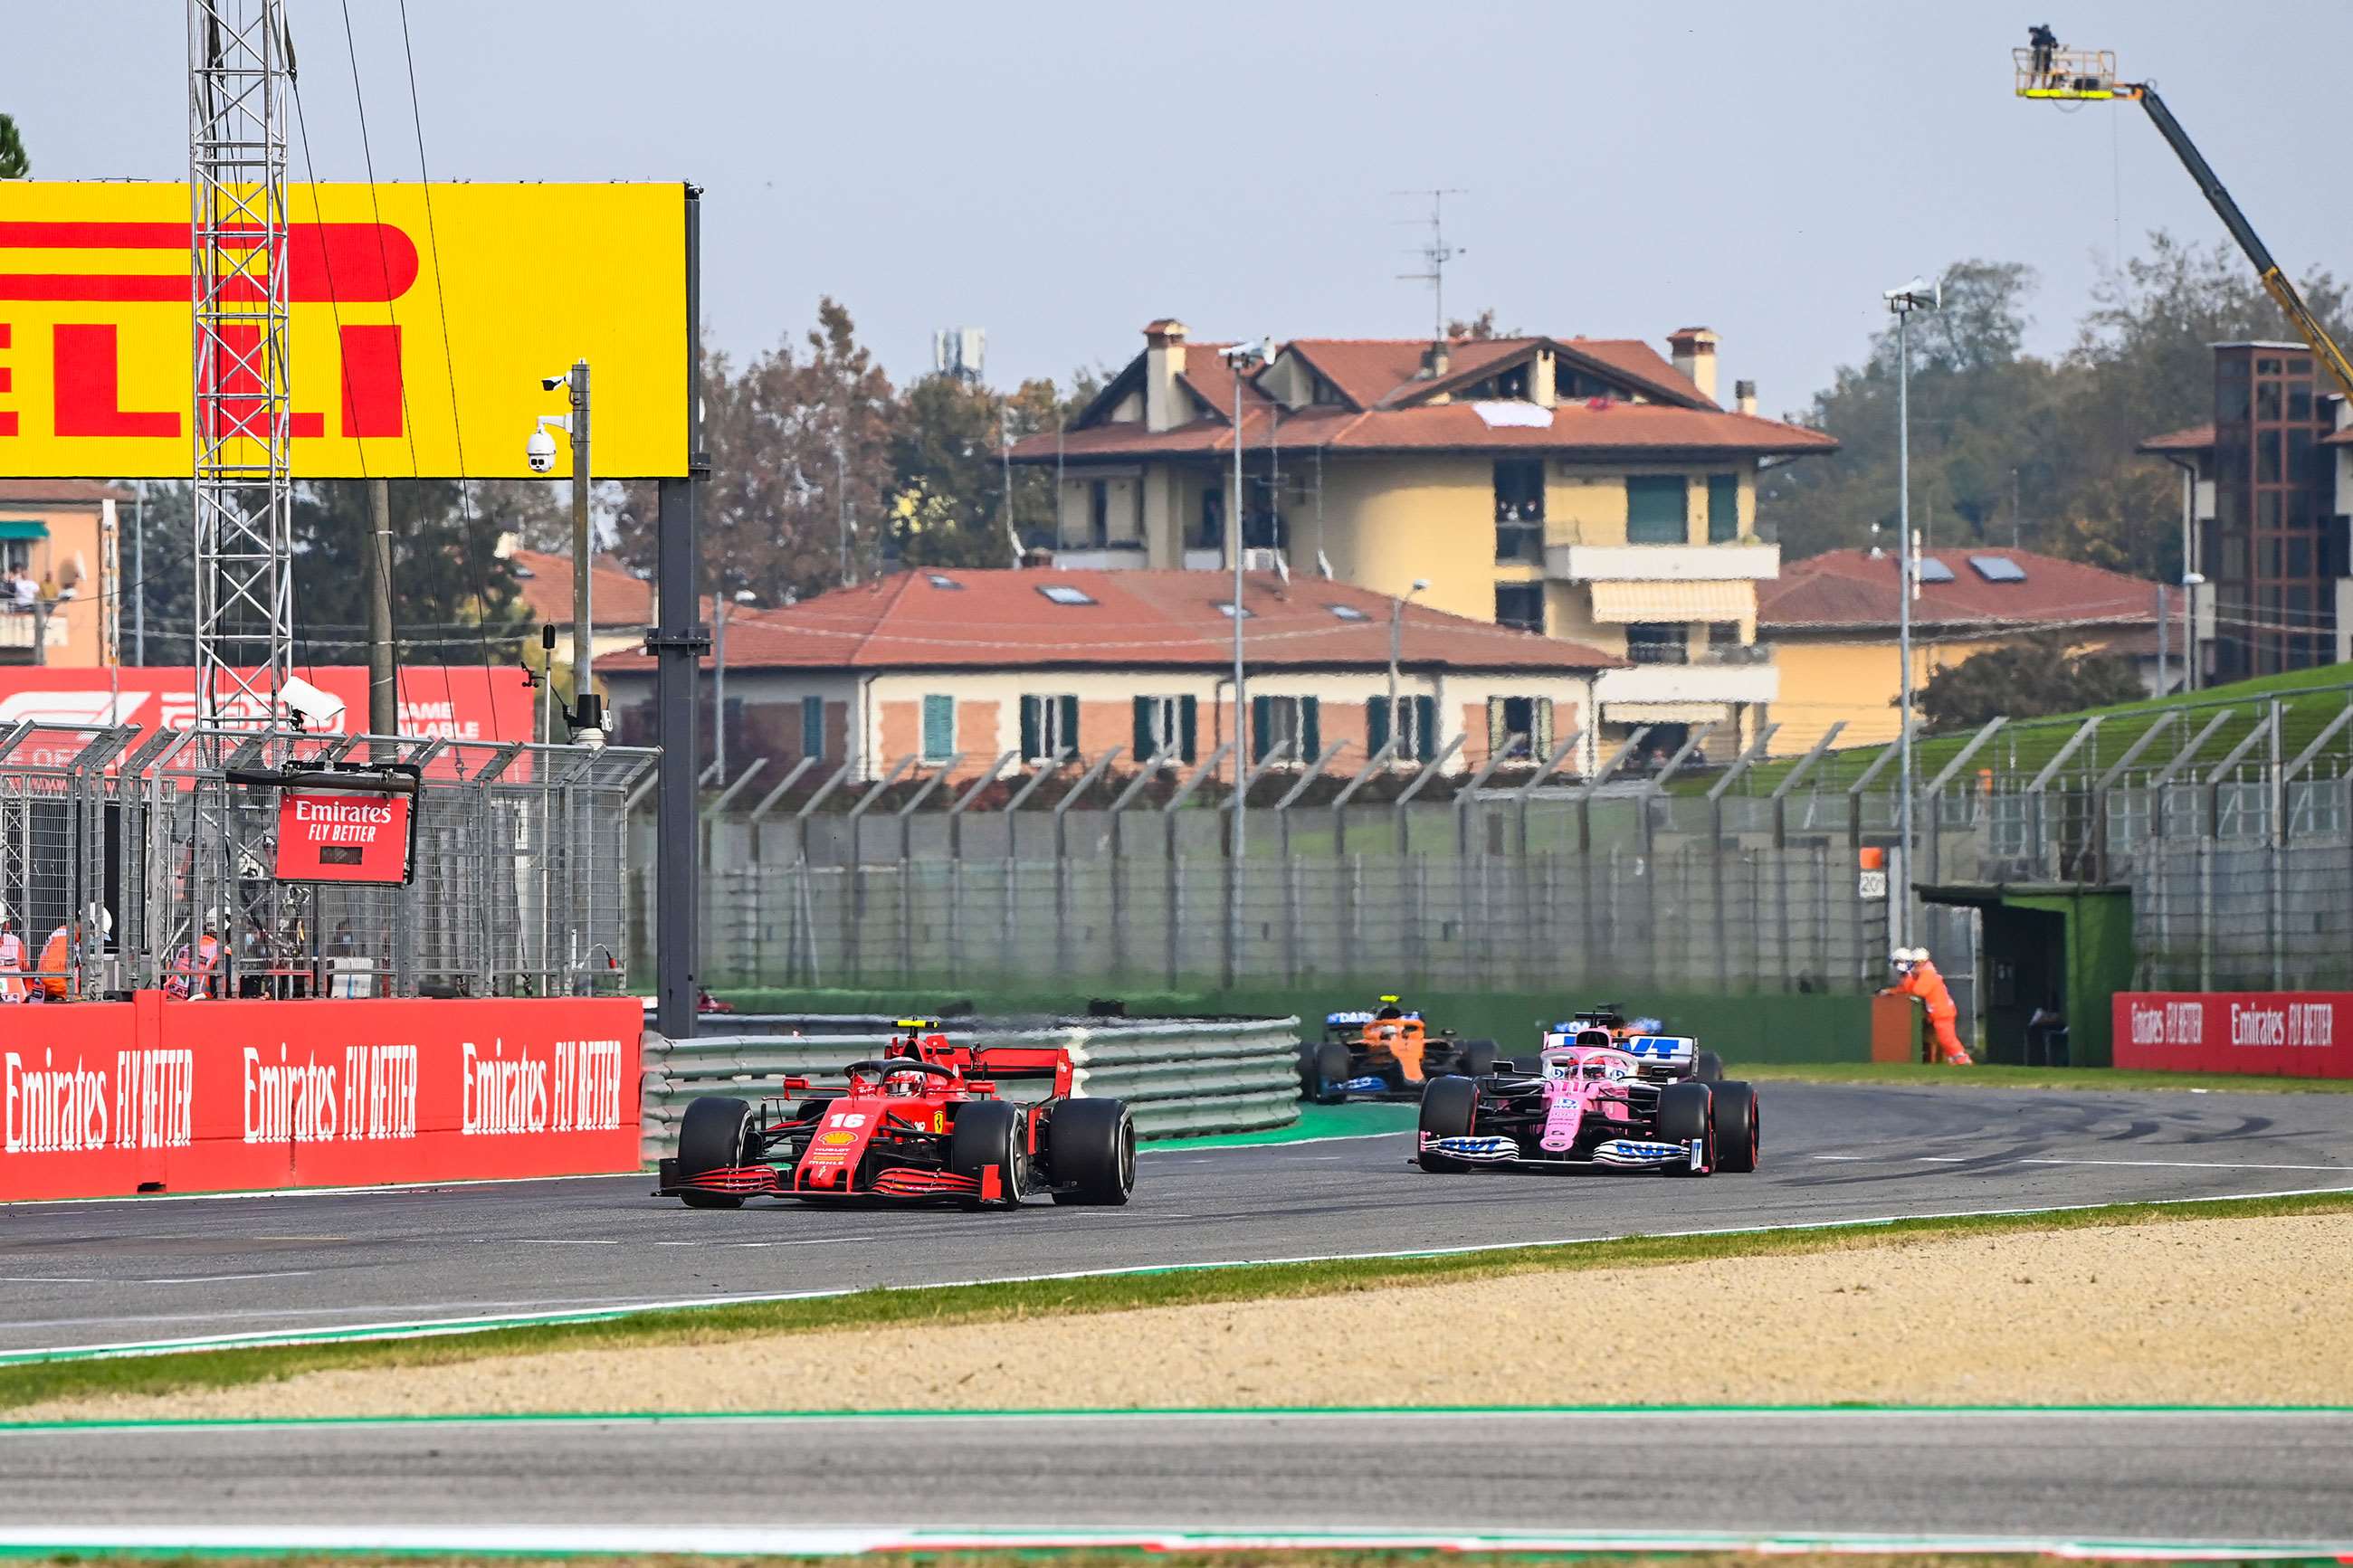 F1 to race at Imola until 2025 GRR